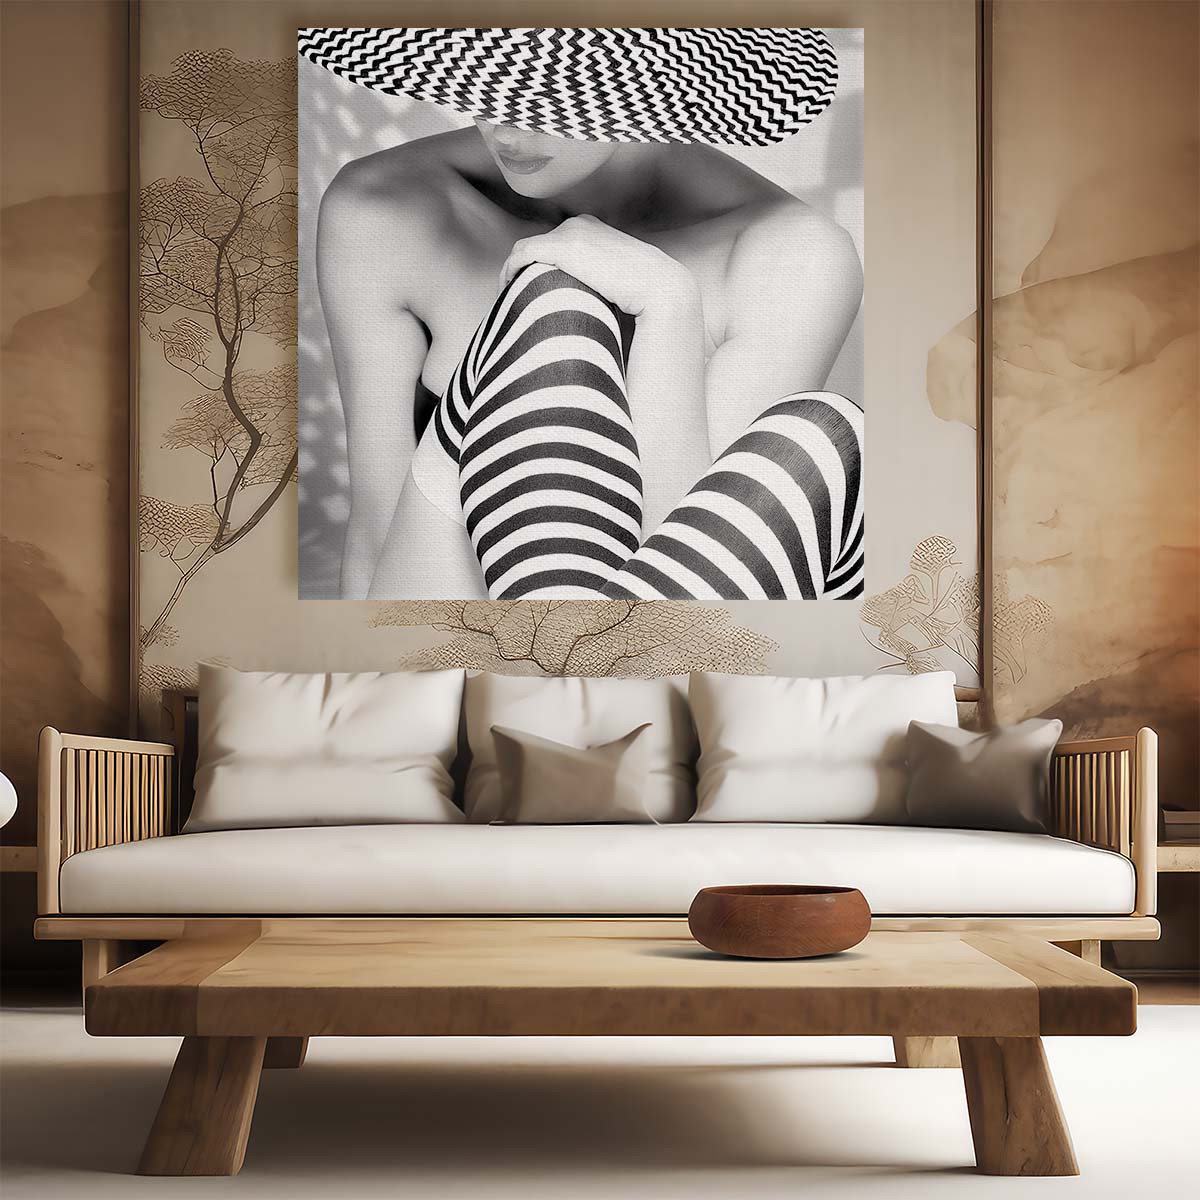 Zigzag Monochrome Fashionista Portrait Photographic Wall Art by Luxuriance Designs. Made in USA.